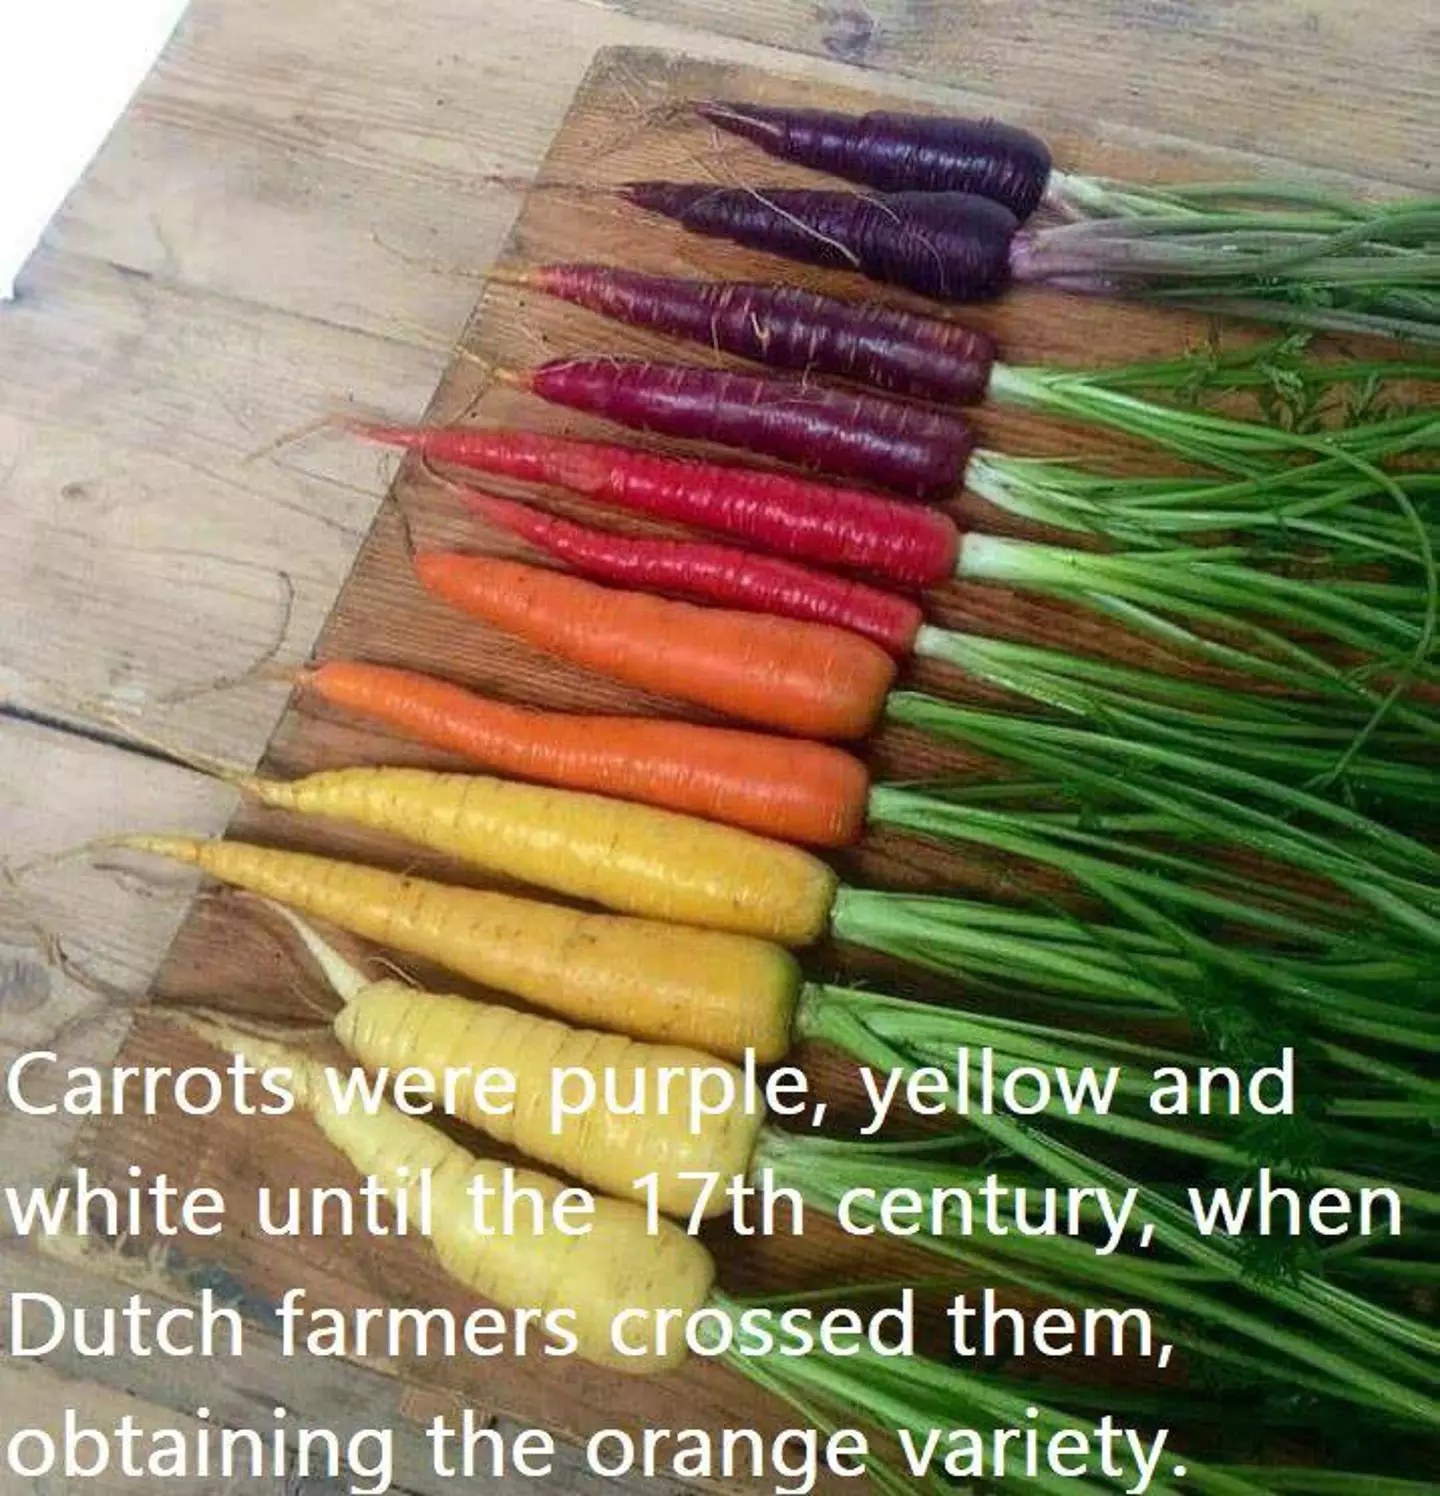 Carrots were selectively bred to be orange.